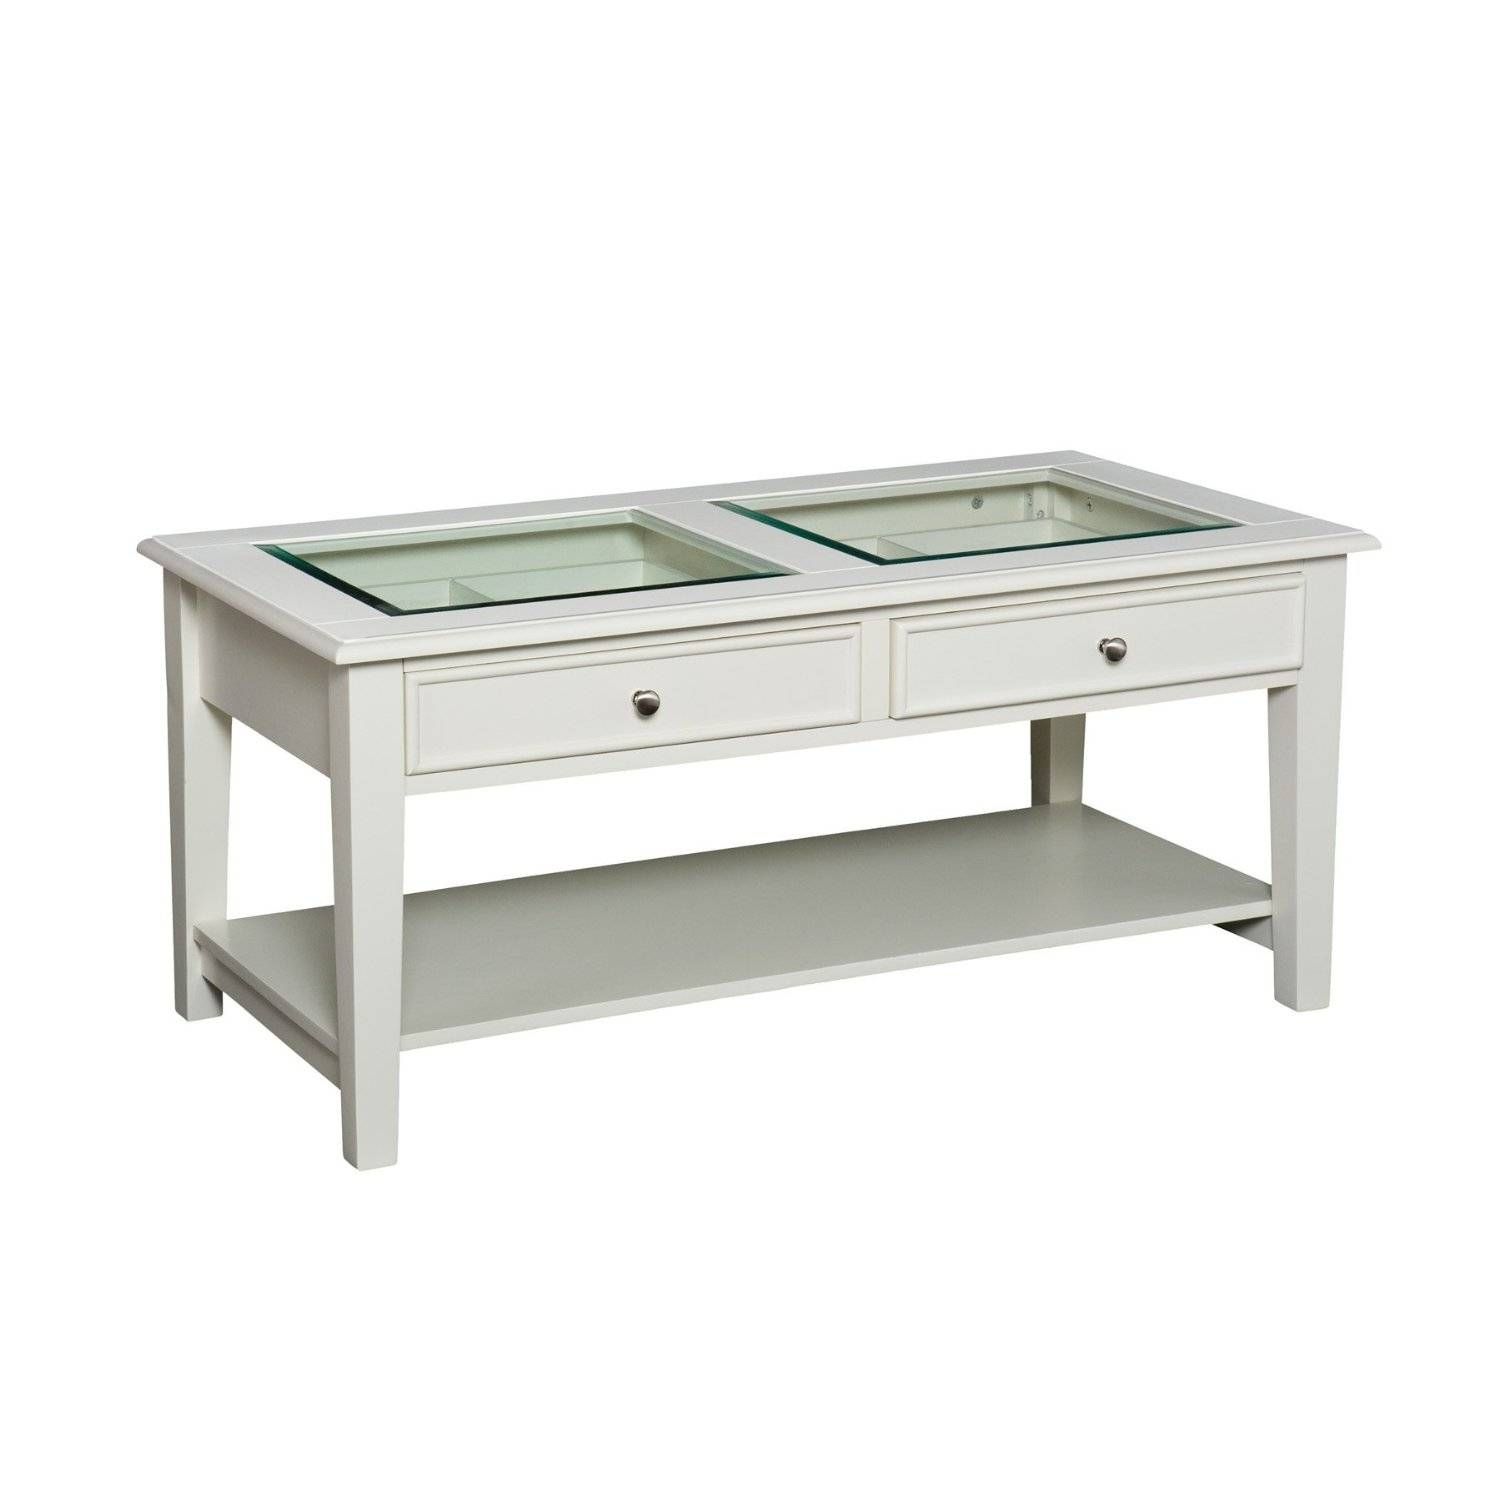 Mesmerizing Small Coffee Tables With Drawers Bring Astounding Intended For Coffee Tables With Shelves (View 25 of 30)